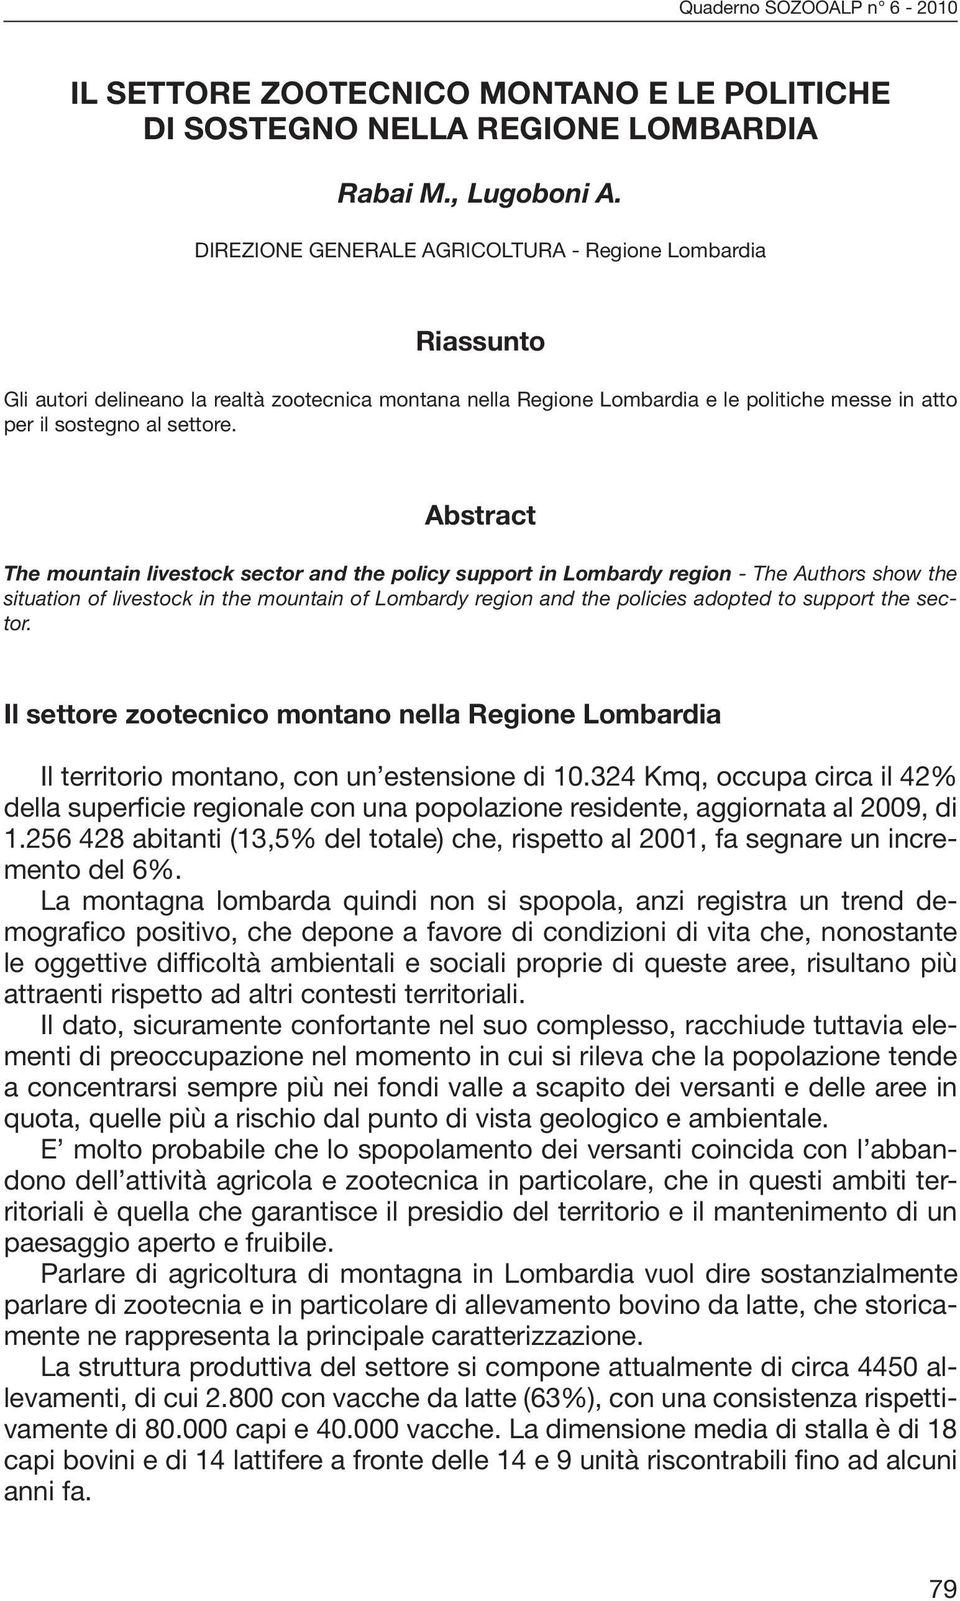 Abstract The mountain livestock sector and the policy support in Lombardy region - The Authors show the situation of livestock in the mountain of Lombardy region and the policies adopted to support